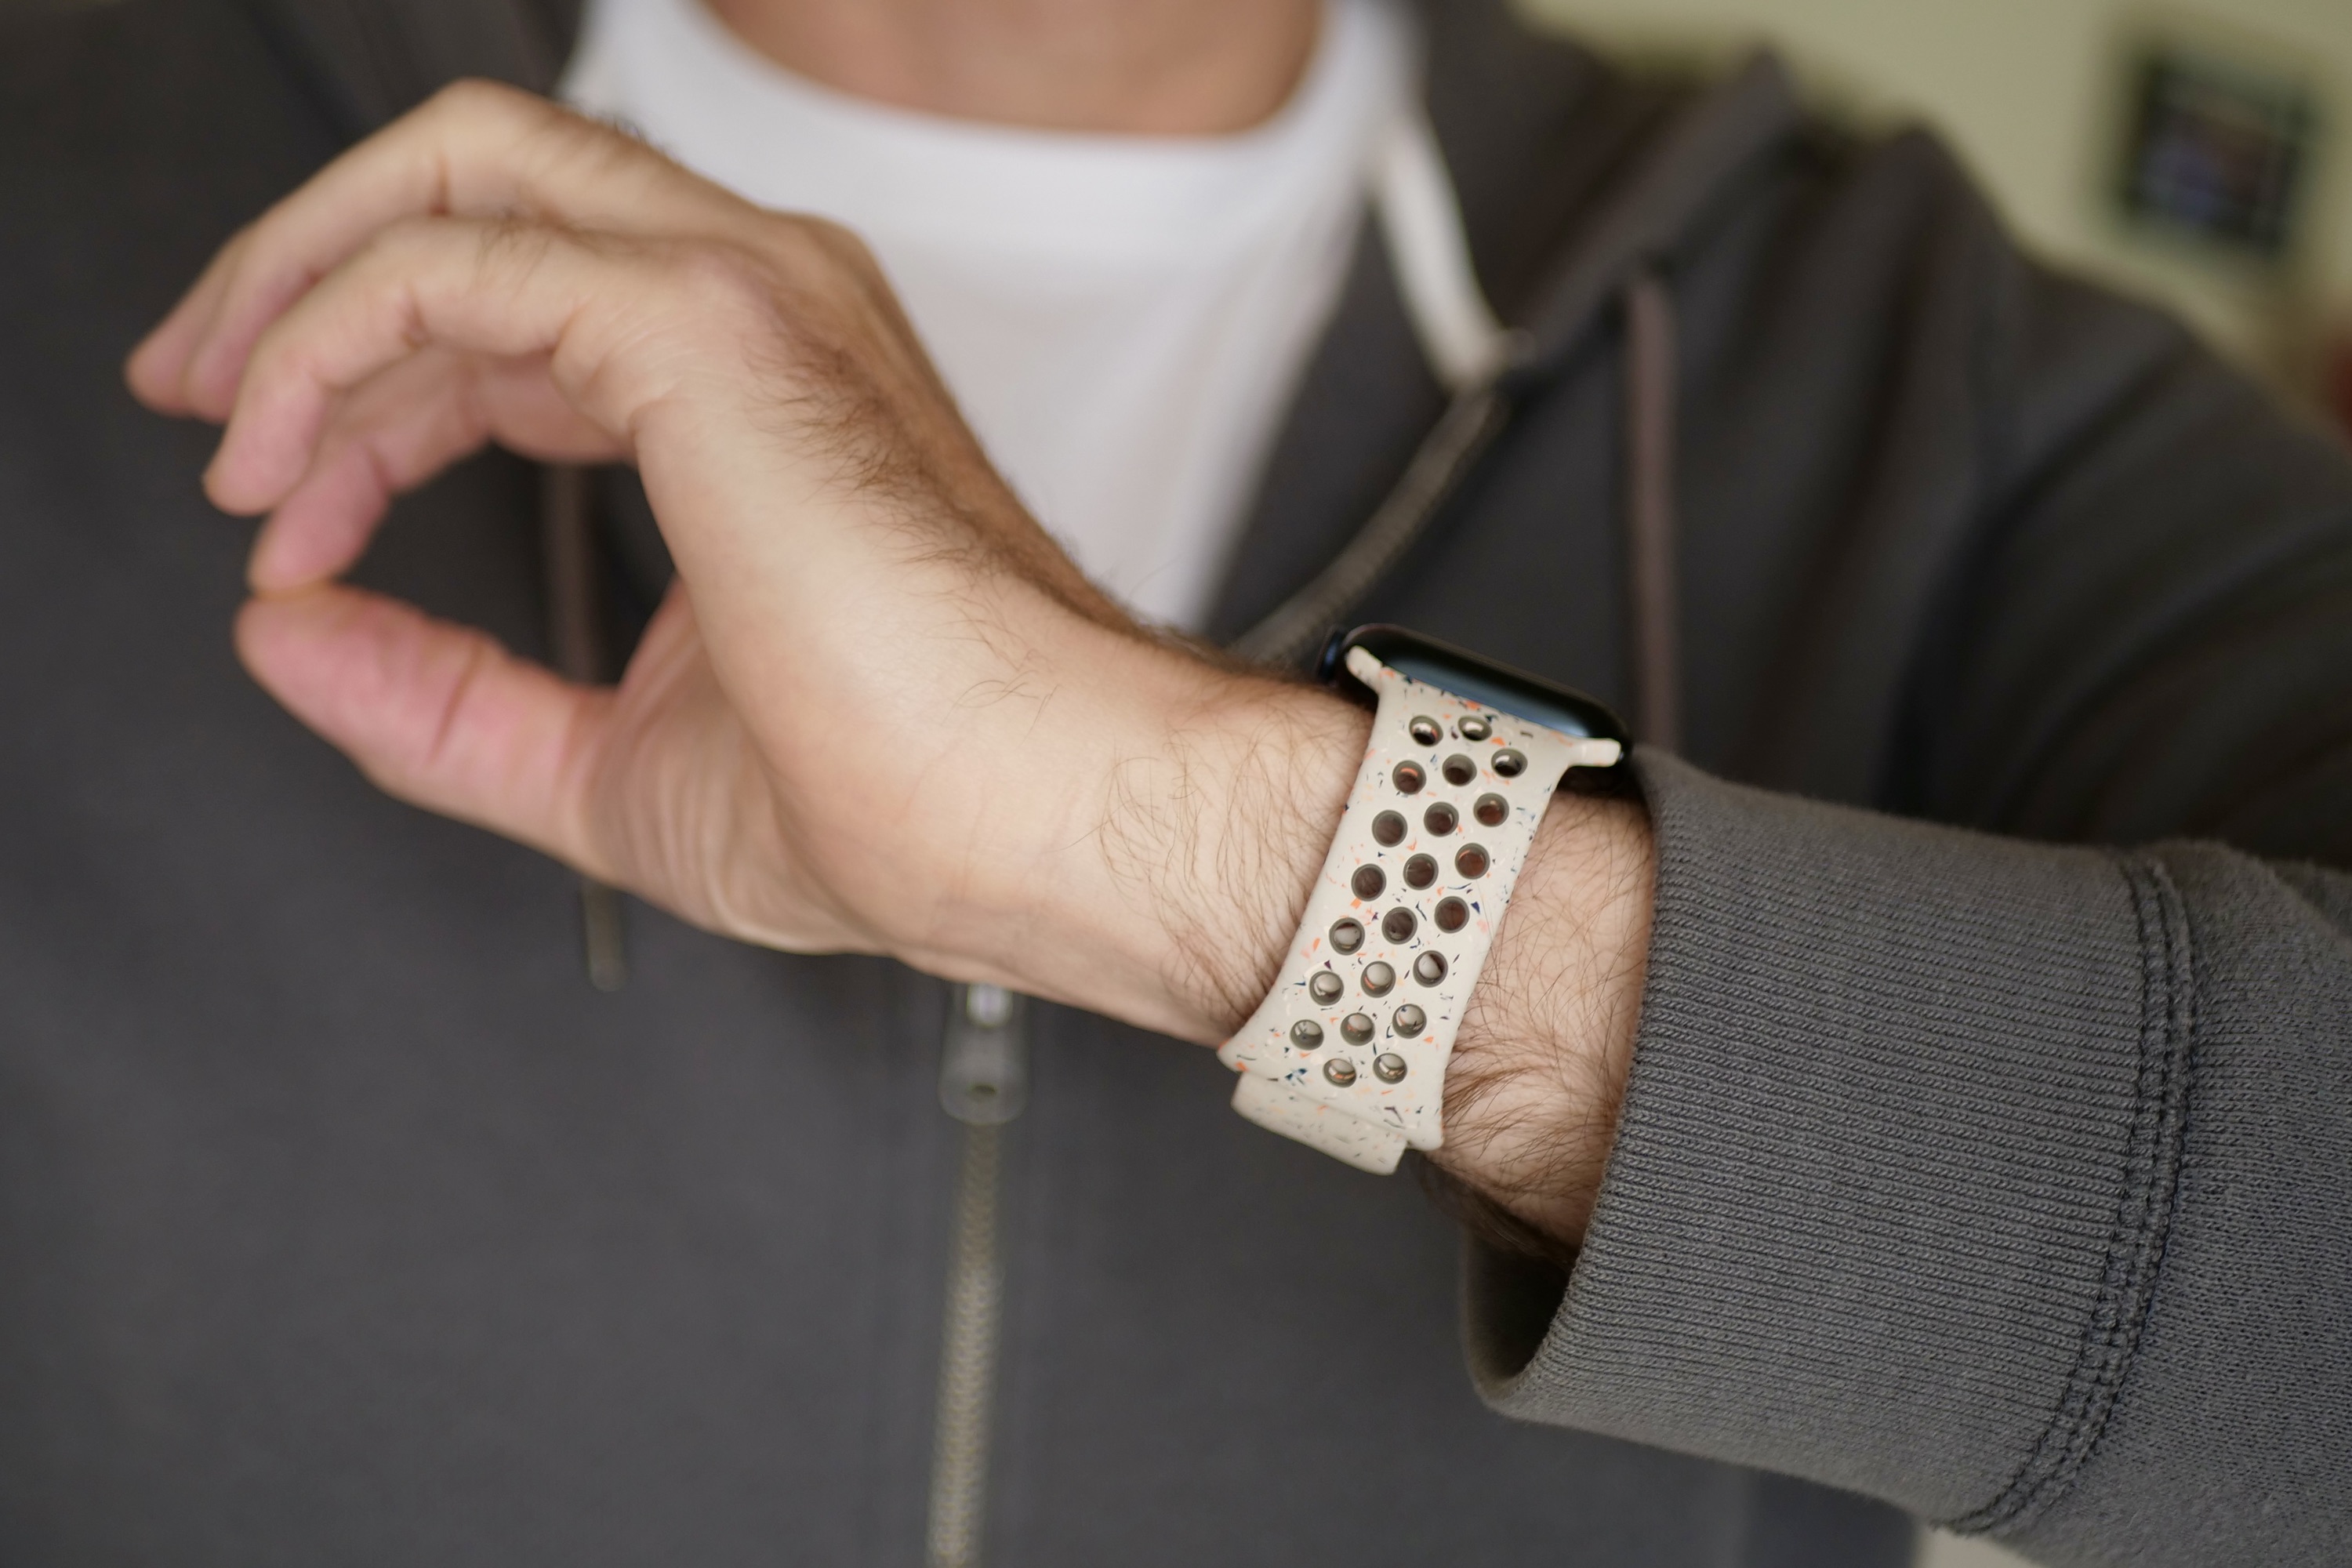 Watch: New 'WristWhirl' smartwatch can be operated with wrist movements